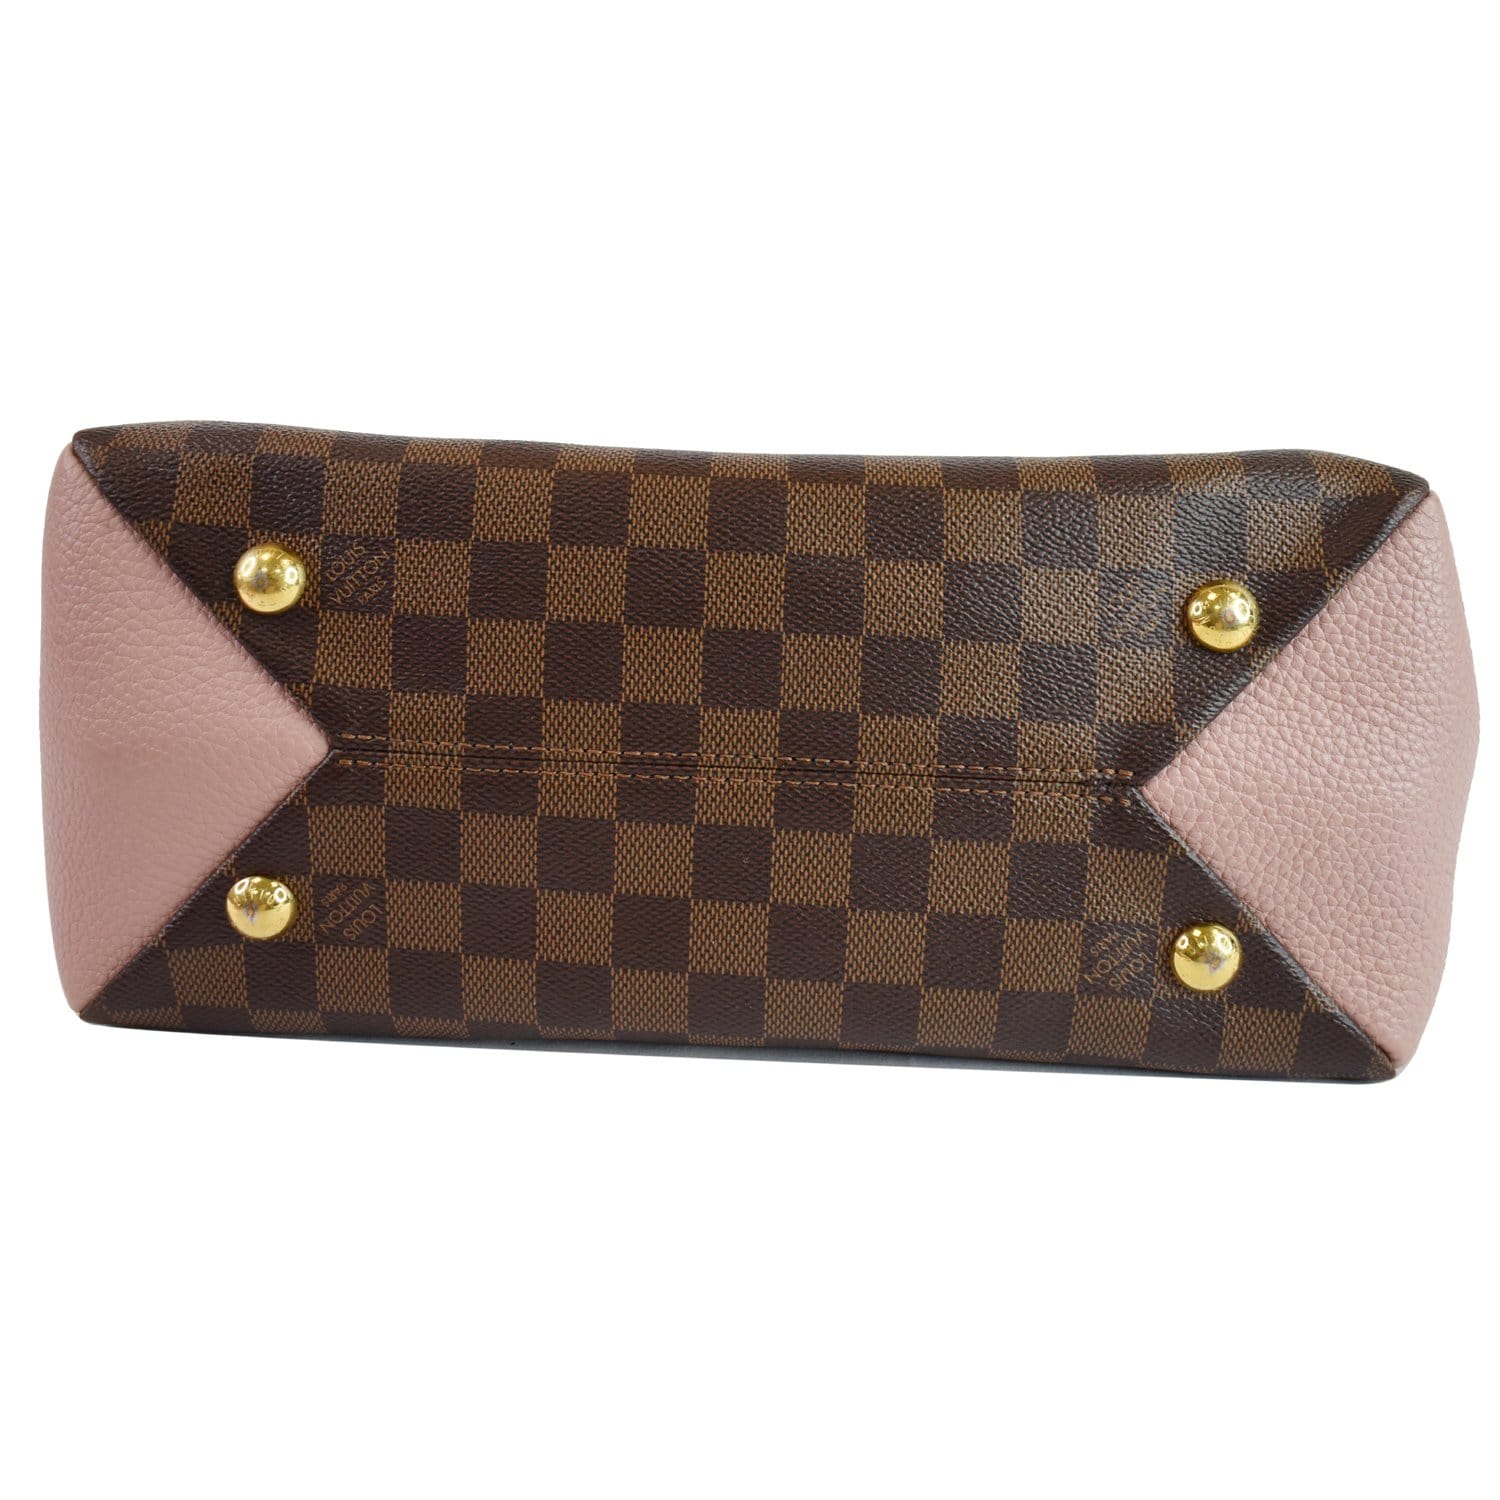 Louis Vuitton Brittany - 2 For Sale on 1stDibs